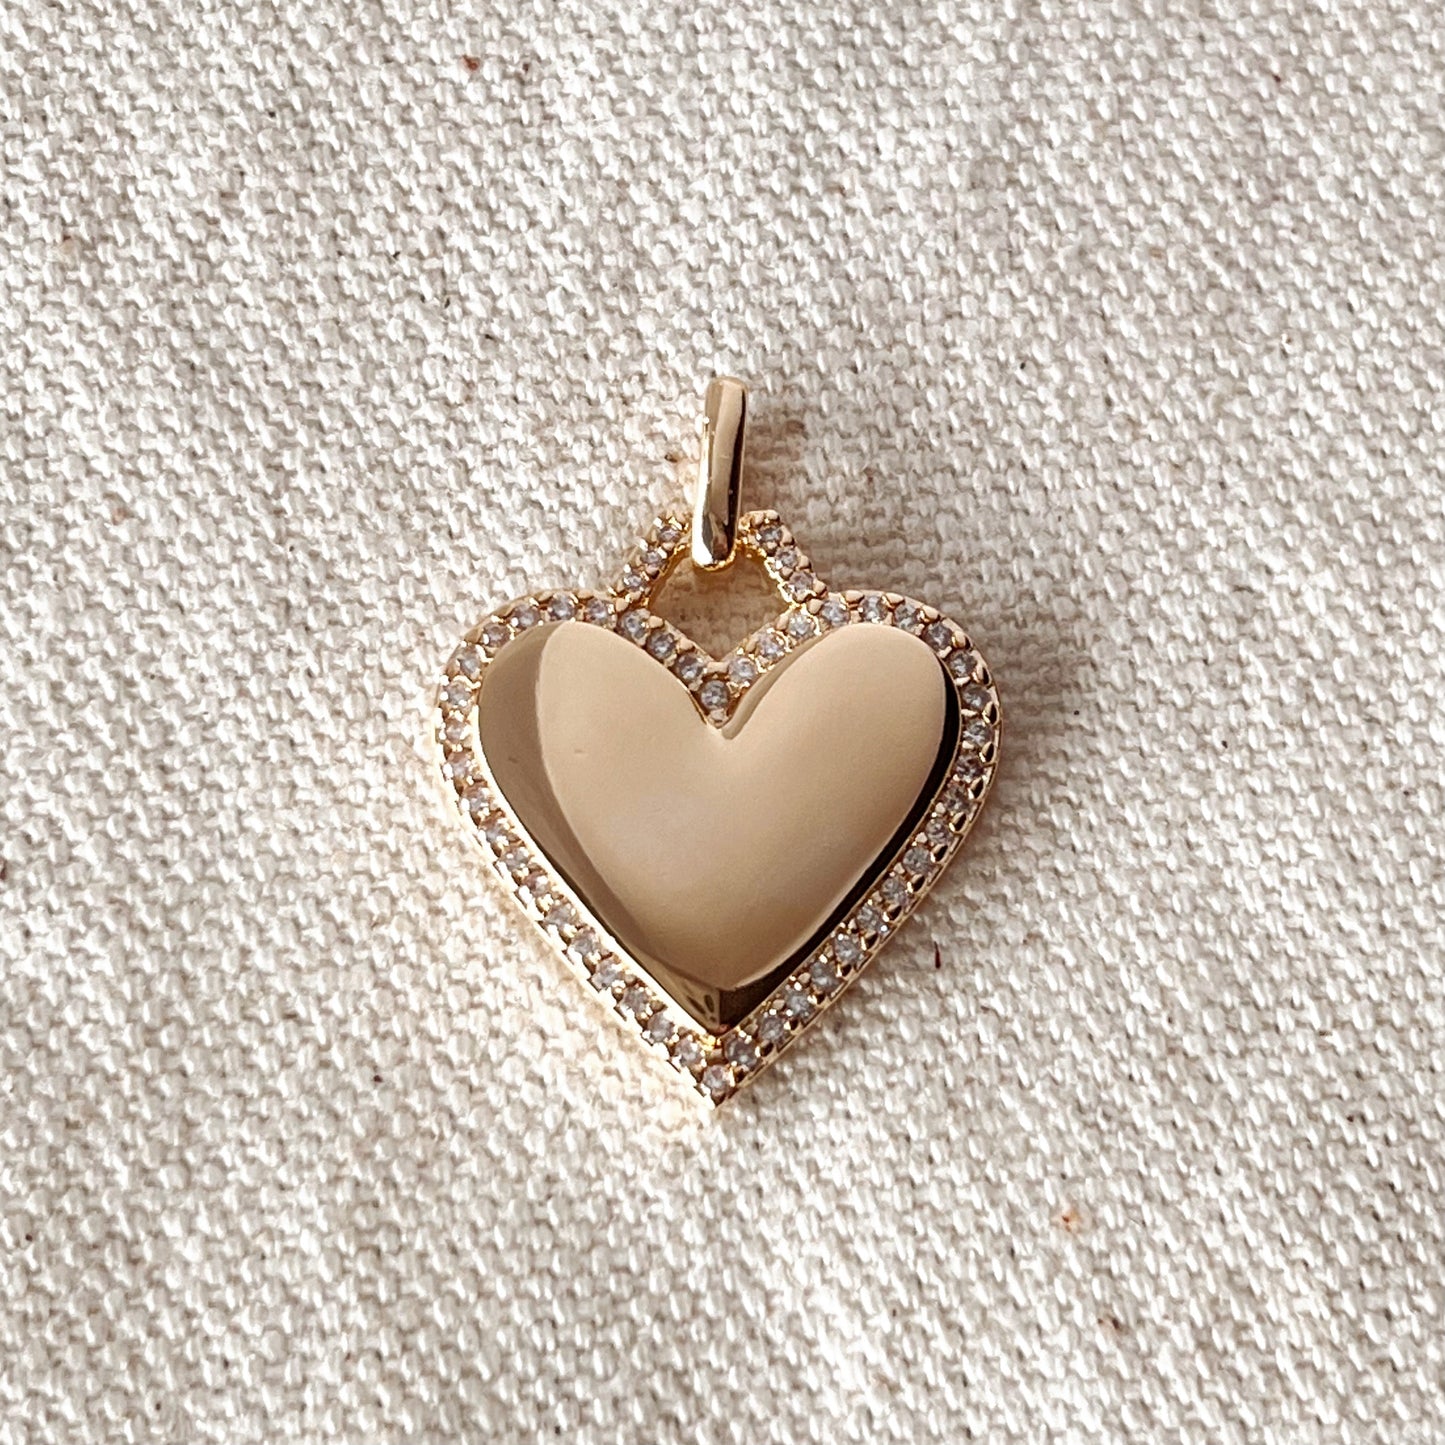 GoldFi 18k Gold Filled Heart Pendant With Cubic Zirconia Around